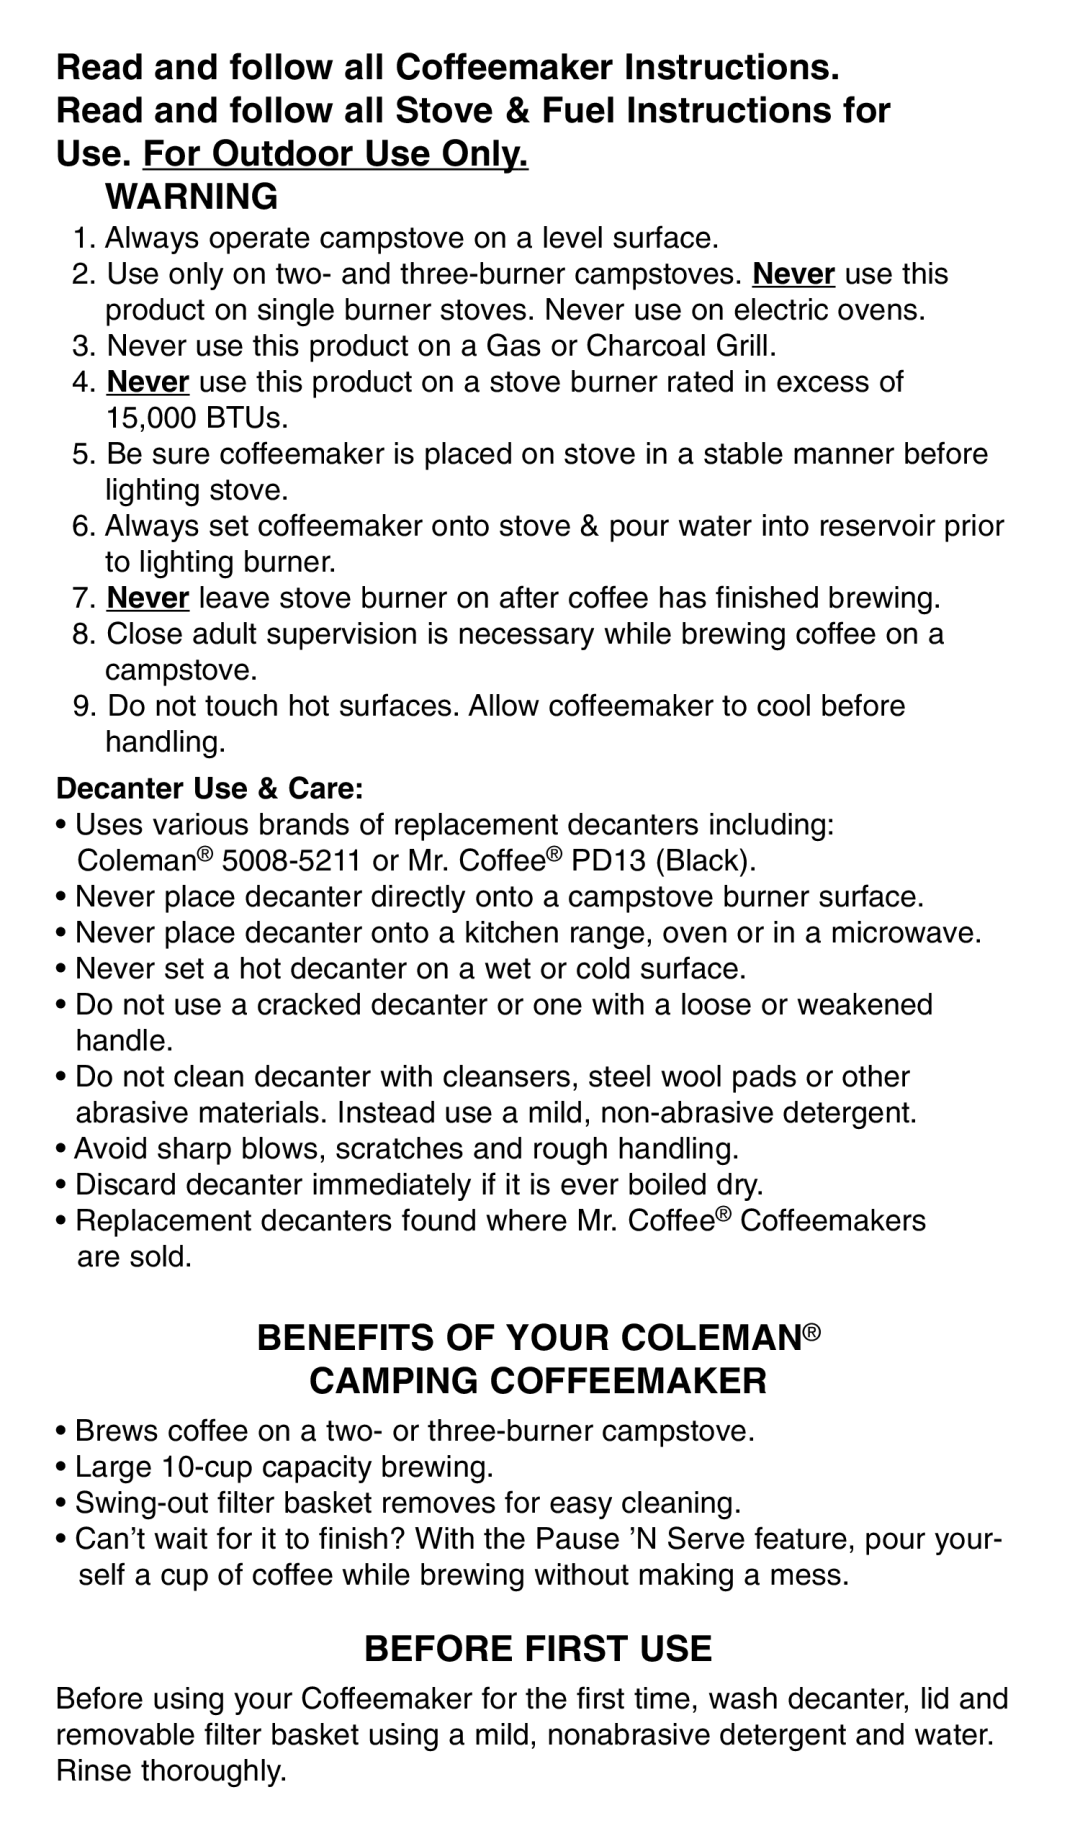 Coleman 5008-700 manual Benefits Of Your Coleman Camping Coffeemaker, Before First Use, Decanter Use & Care 